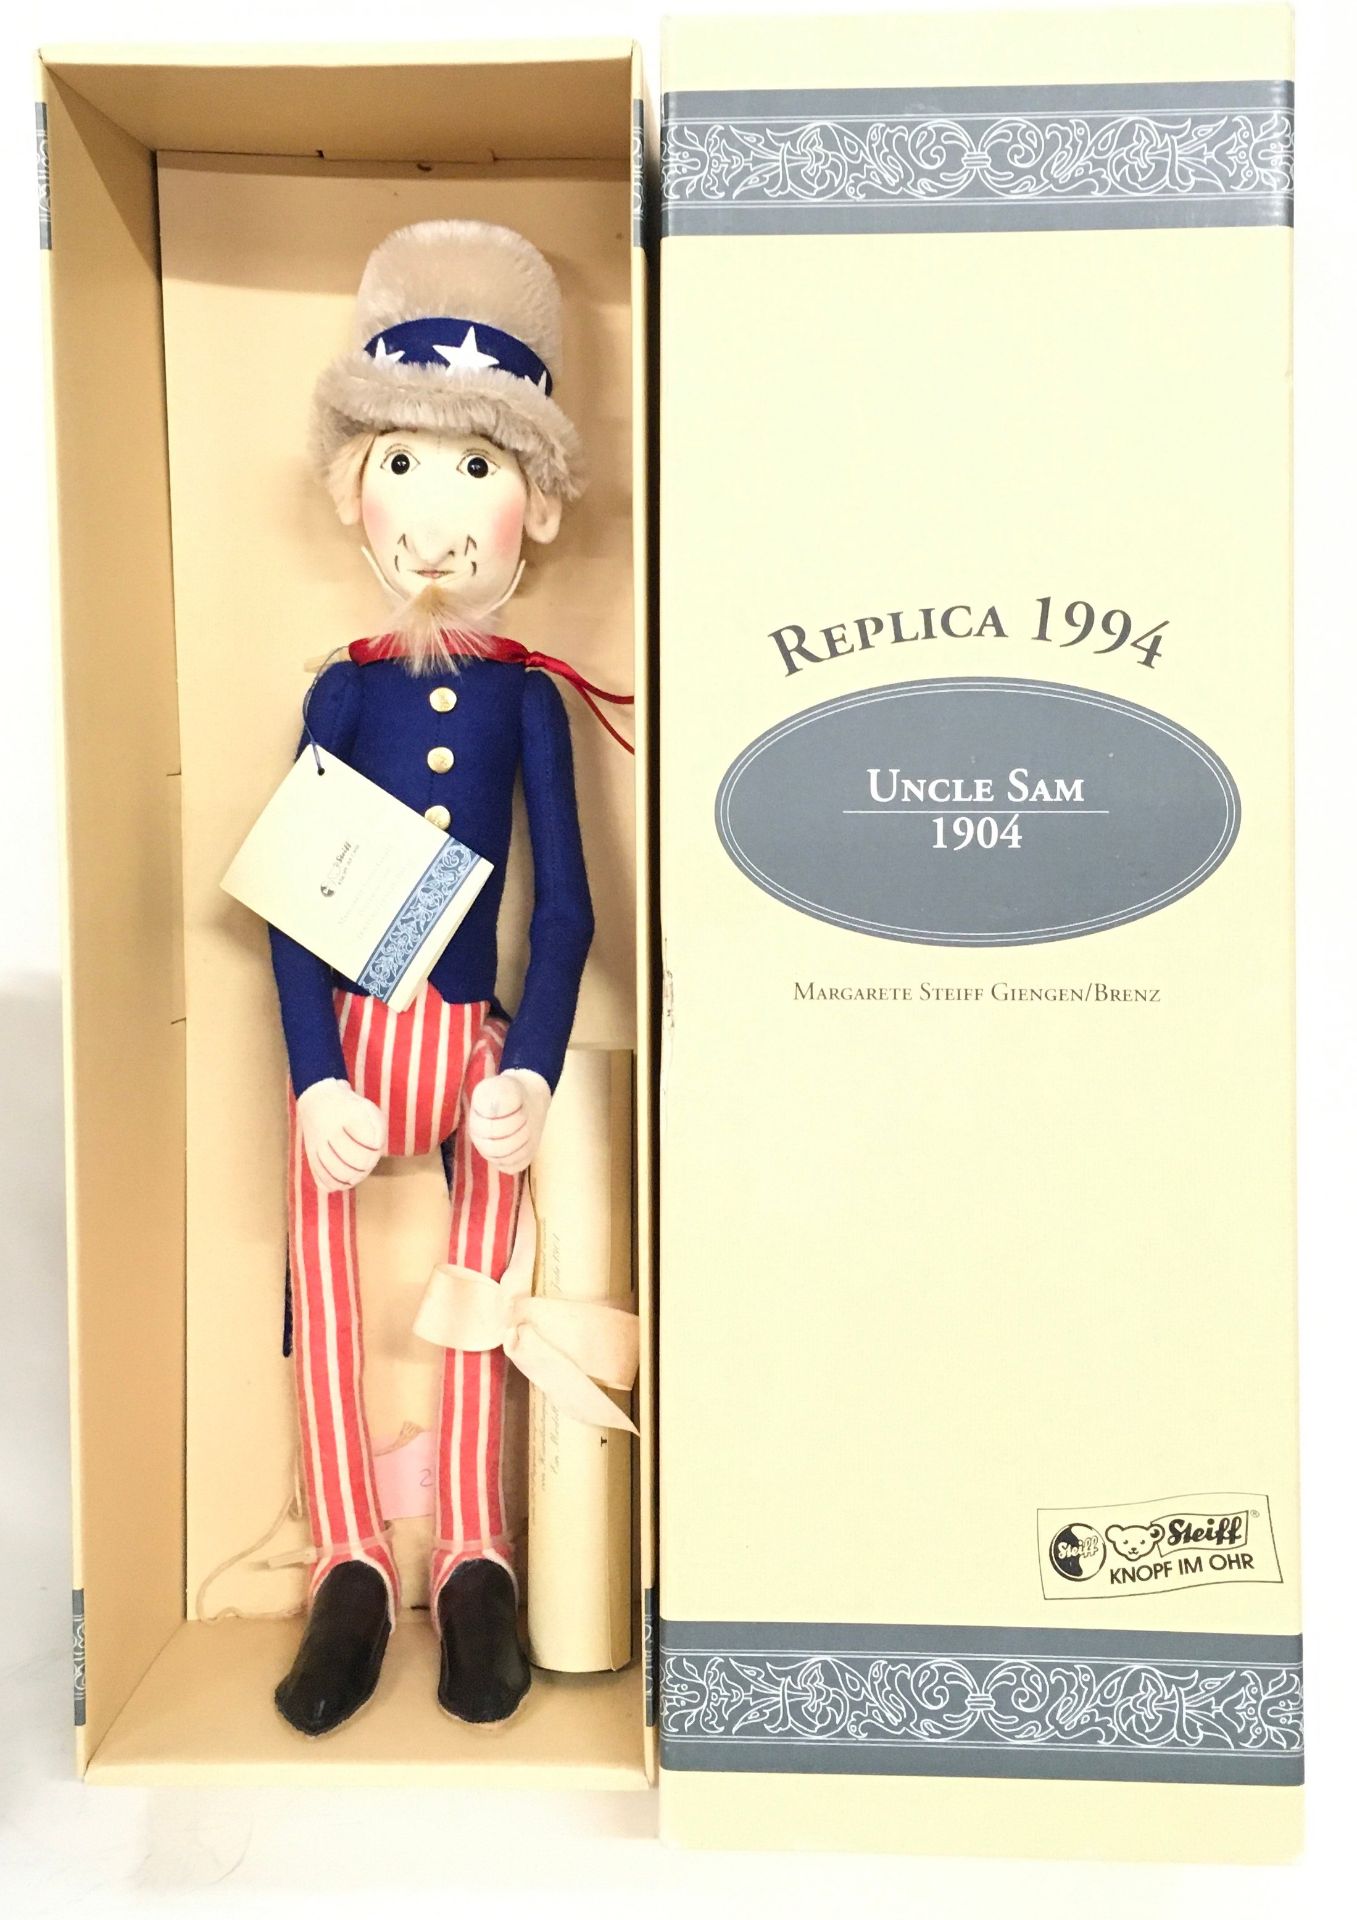 Steiff Uncle Sam replica 1904 felt Doll, 1994, white tag 411601, LE 1000, complete with swing